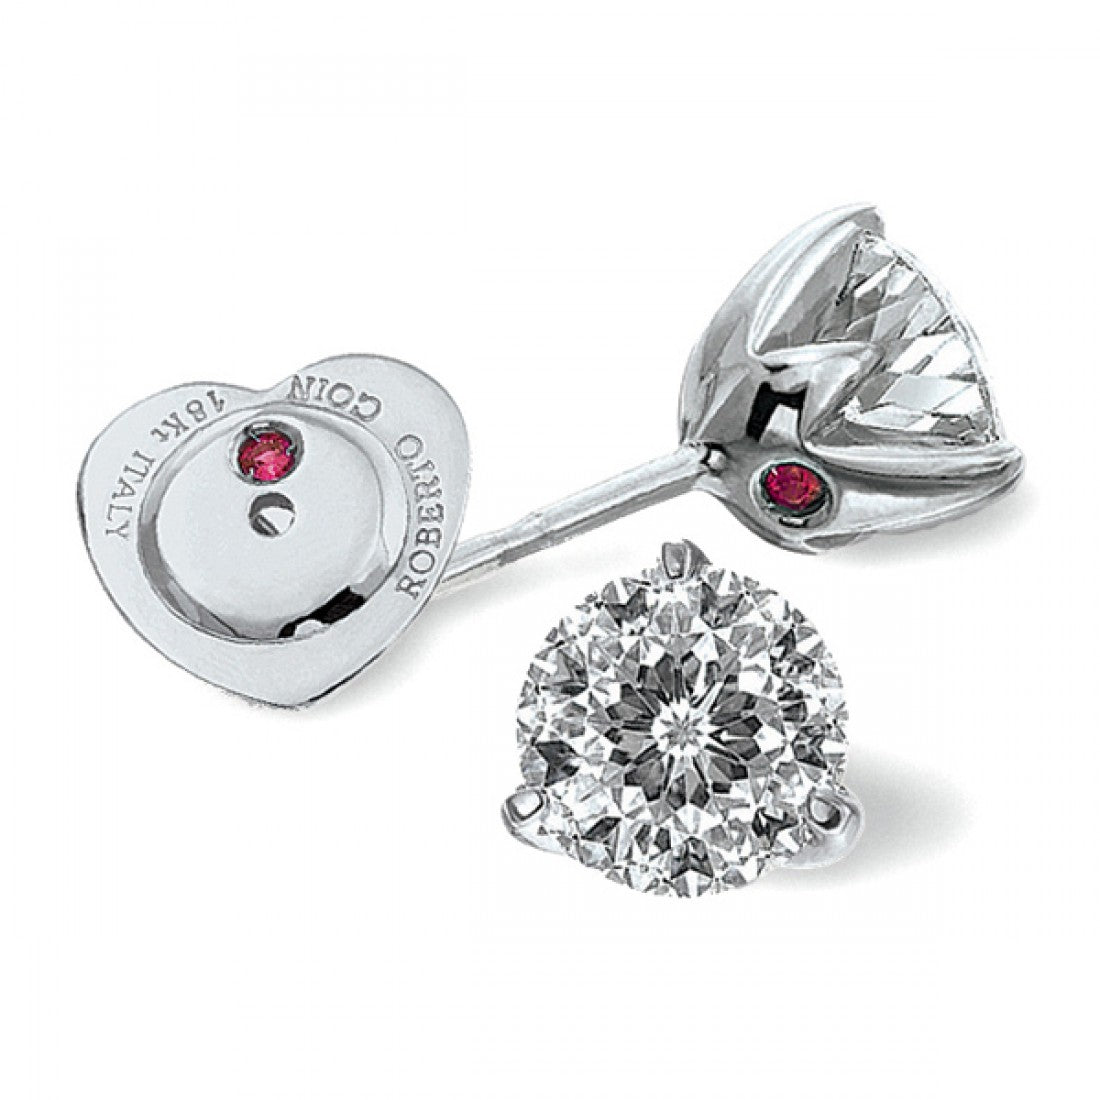 ROBERTO COIN 18K WHITE GOLD DIAMOND STUDS (ALL SIZES AVAILABLE) FROM THE CENTO COLLECTION